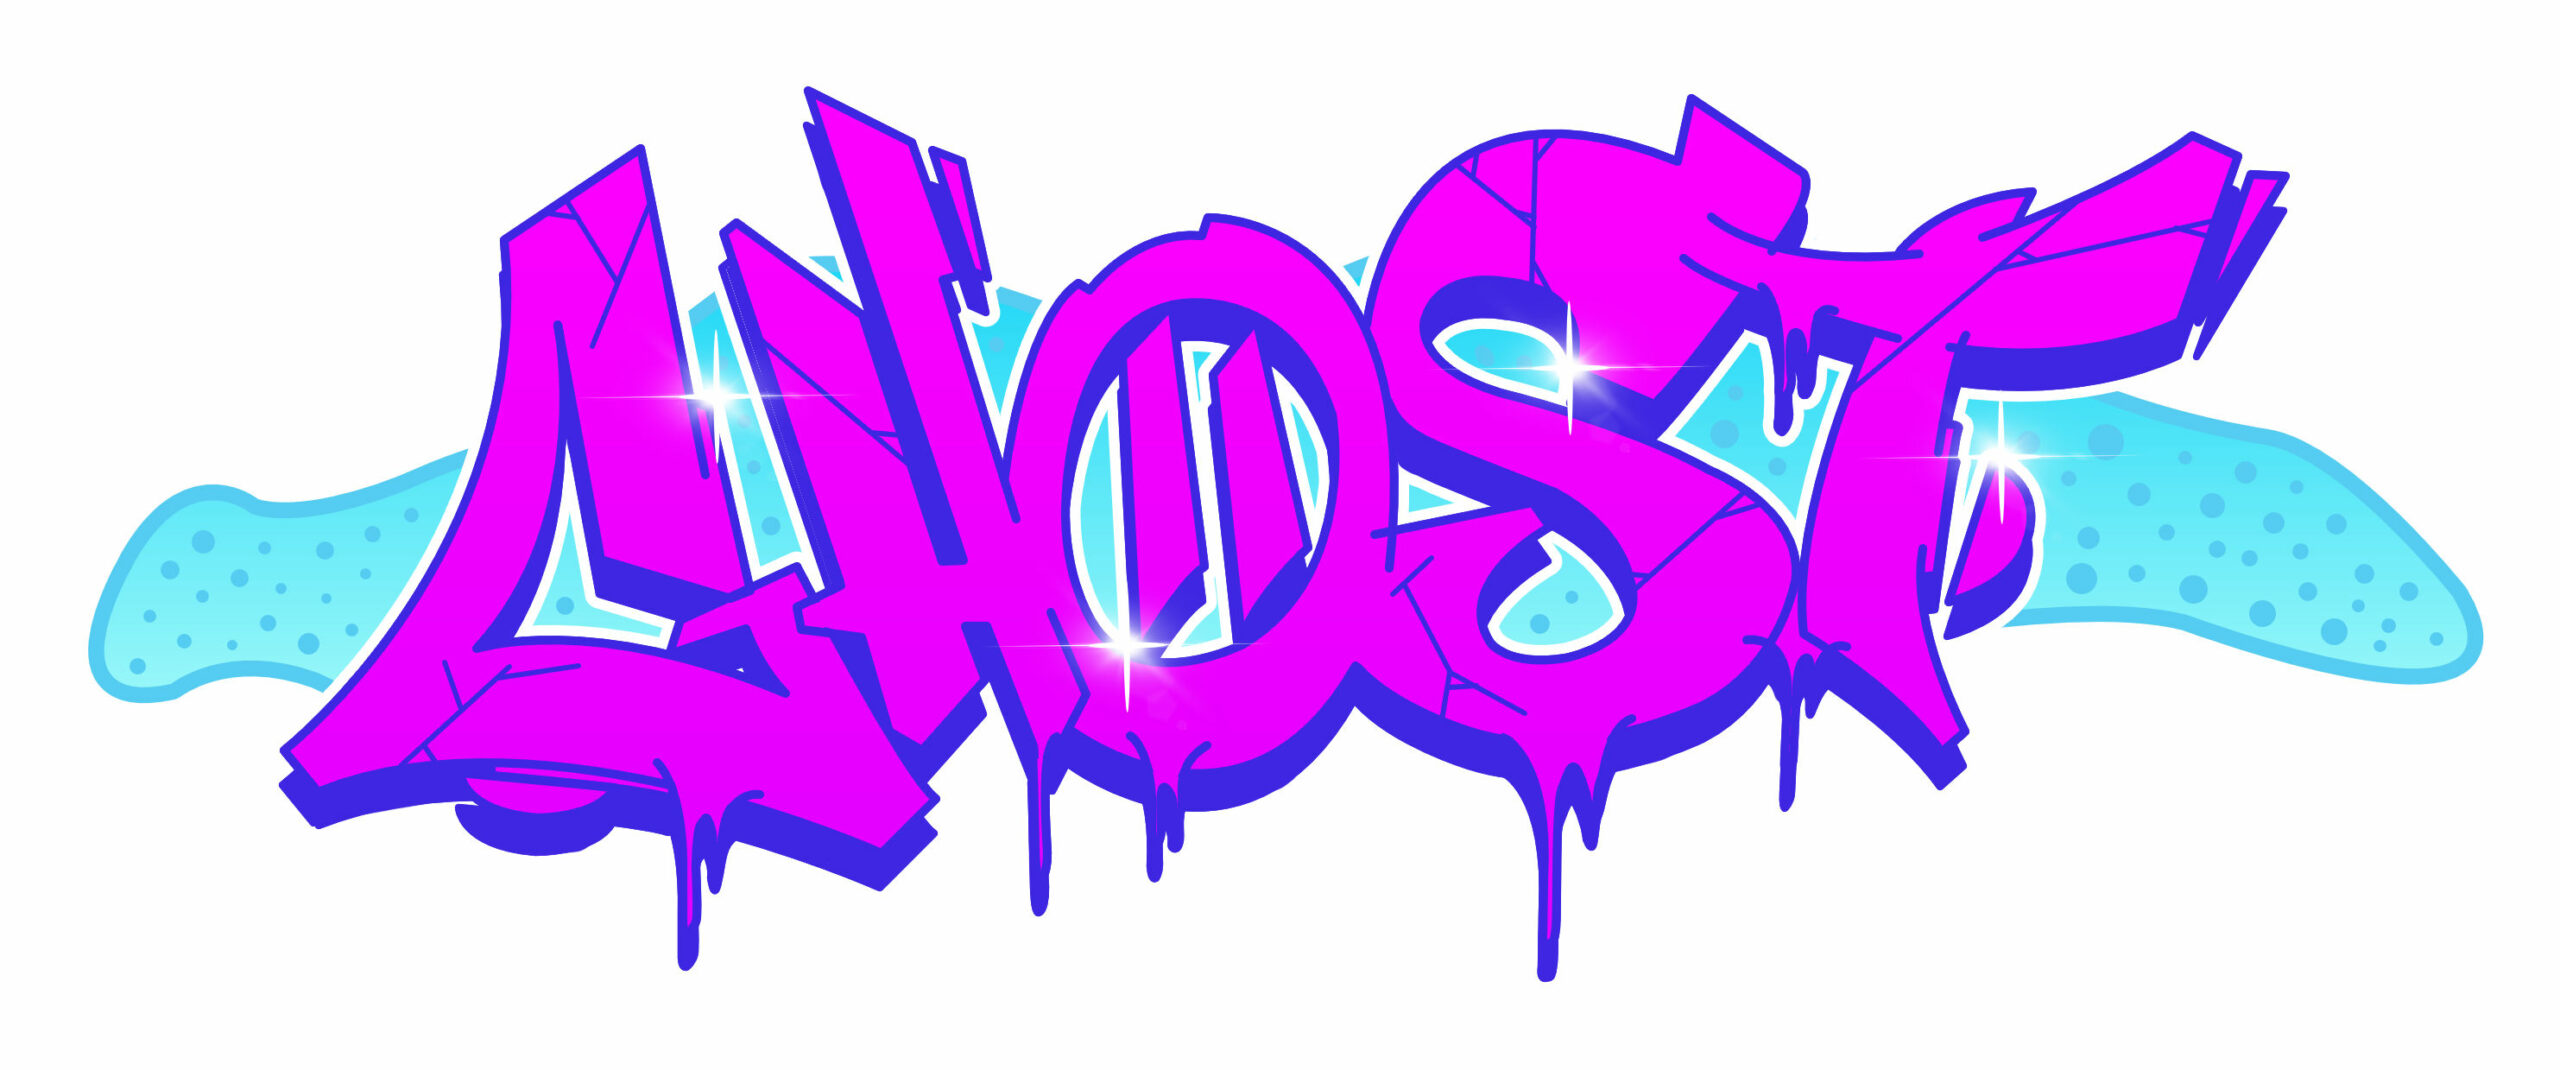 How to Draw “Ghost” in Graffiti in 12 Steps